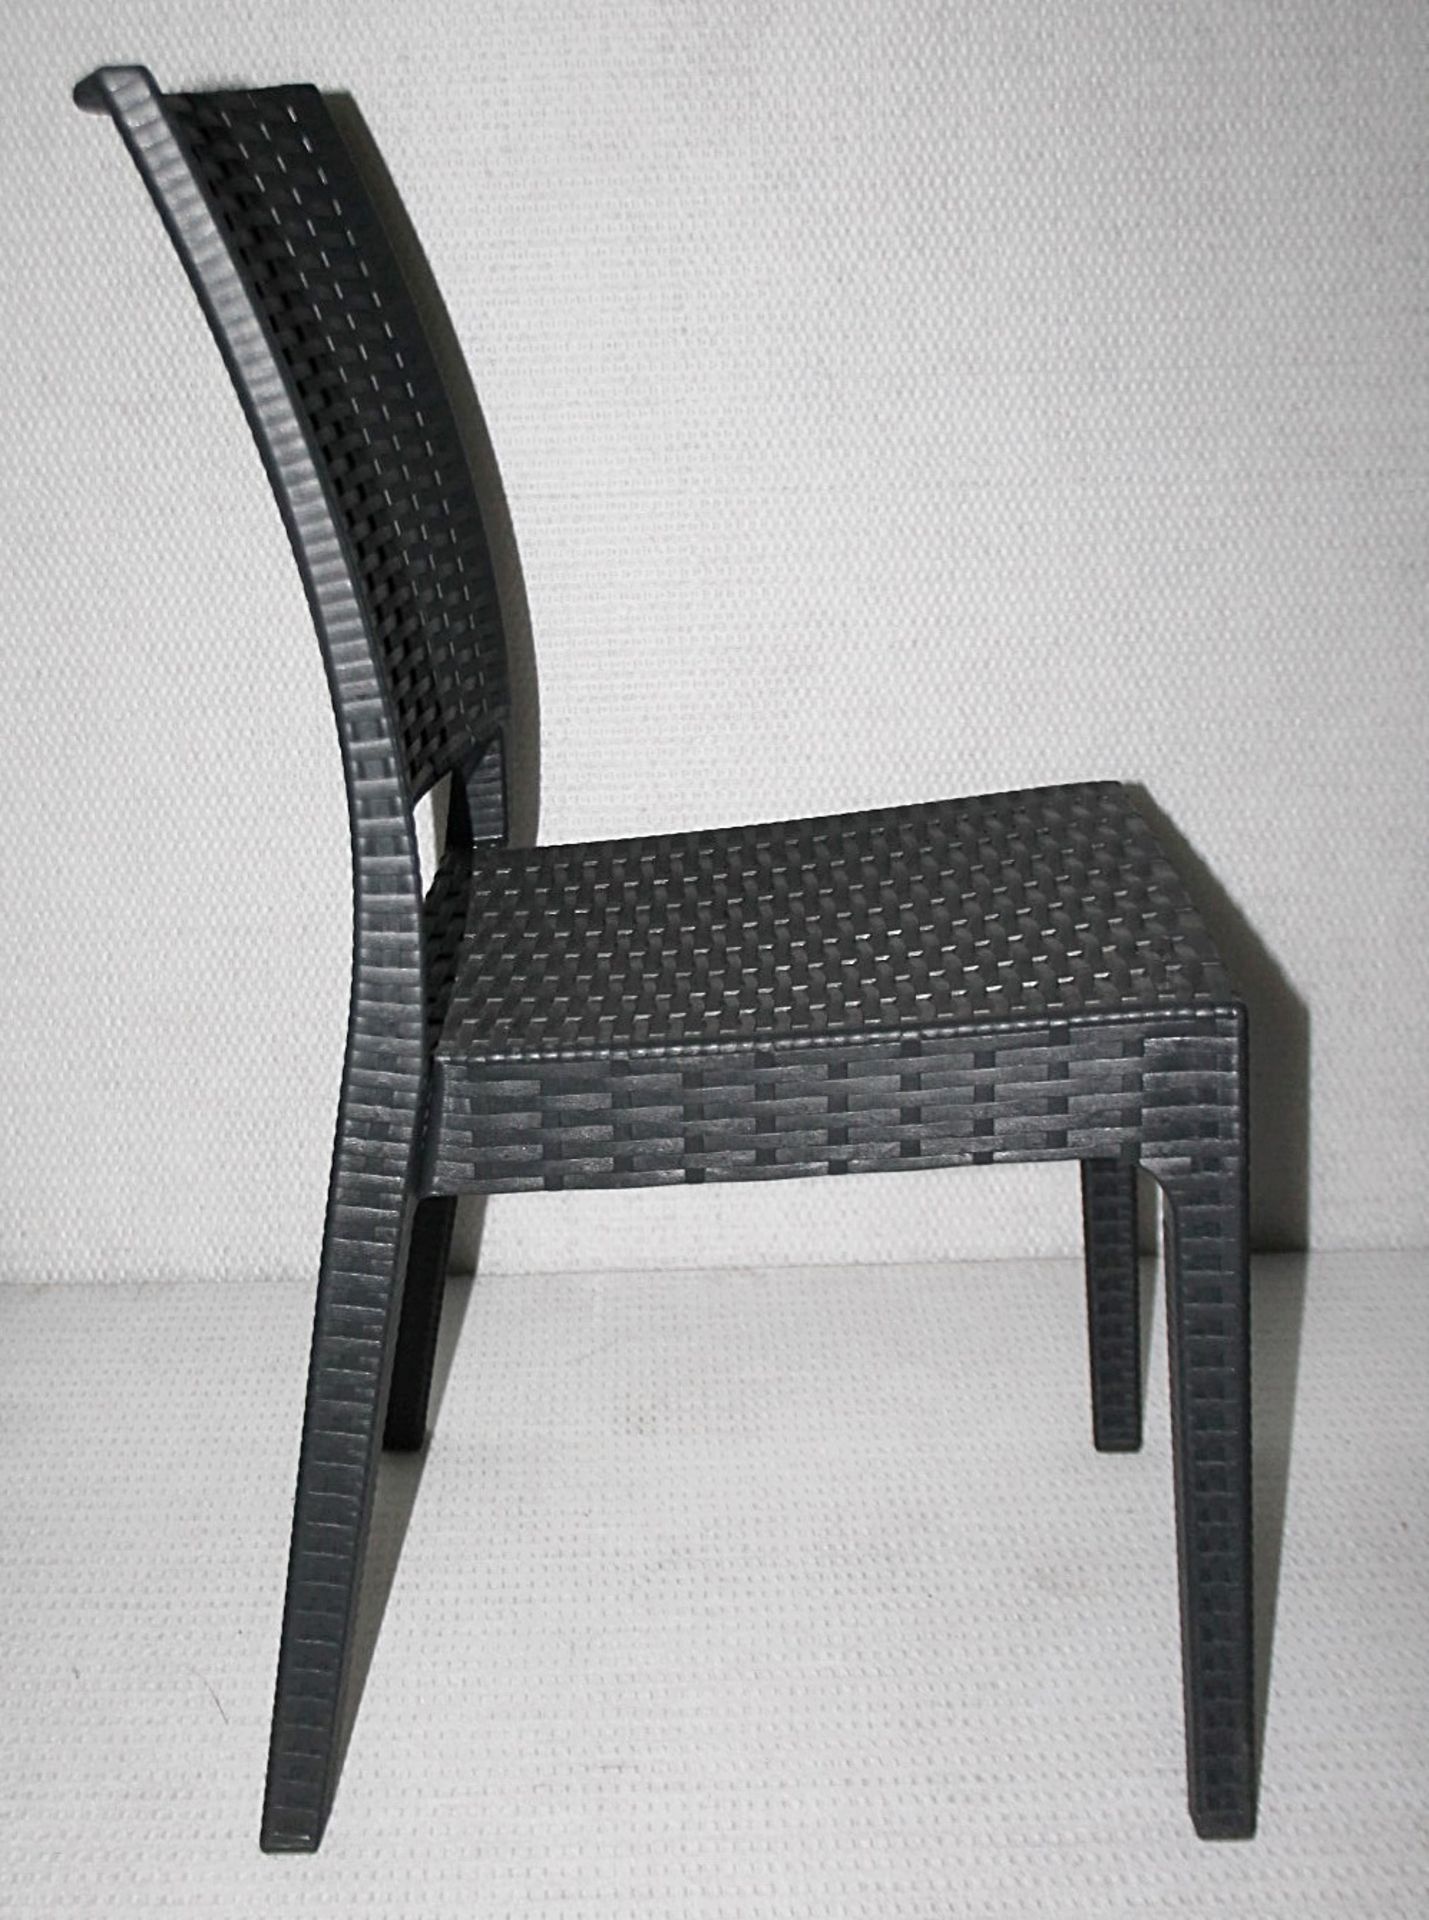 8 x SIESTA EXCLUSIVE 'Florida' Commercial Stackable Rattan-style Chairs In Dark Grey - Image 5 of 13